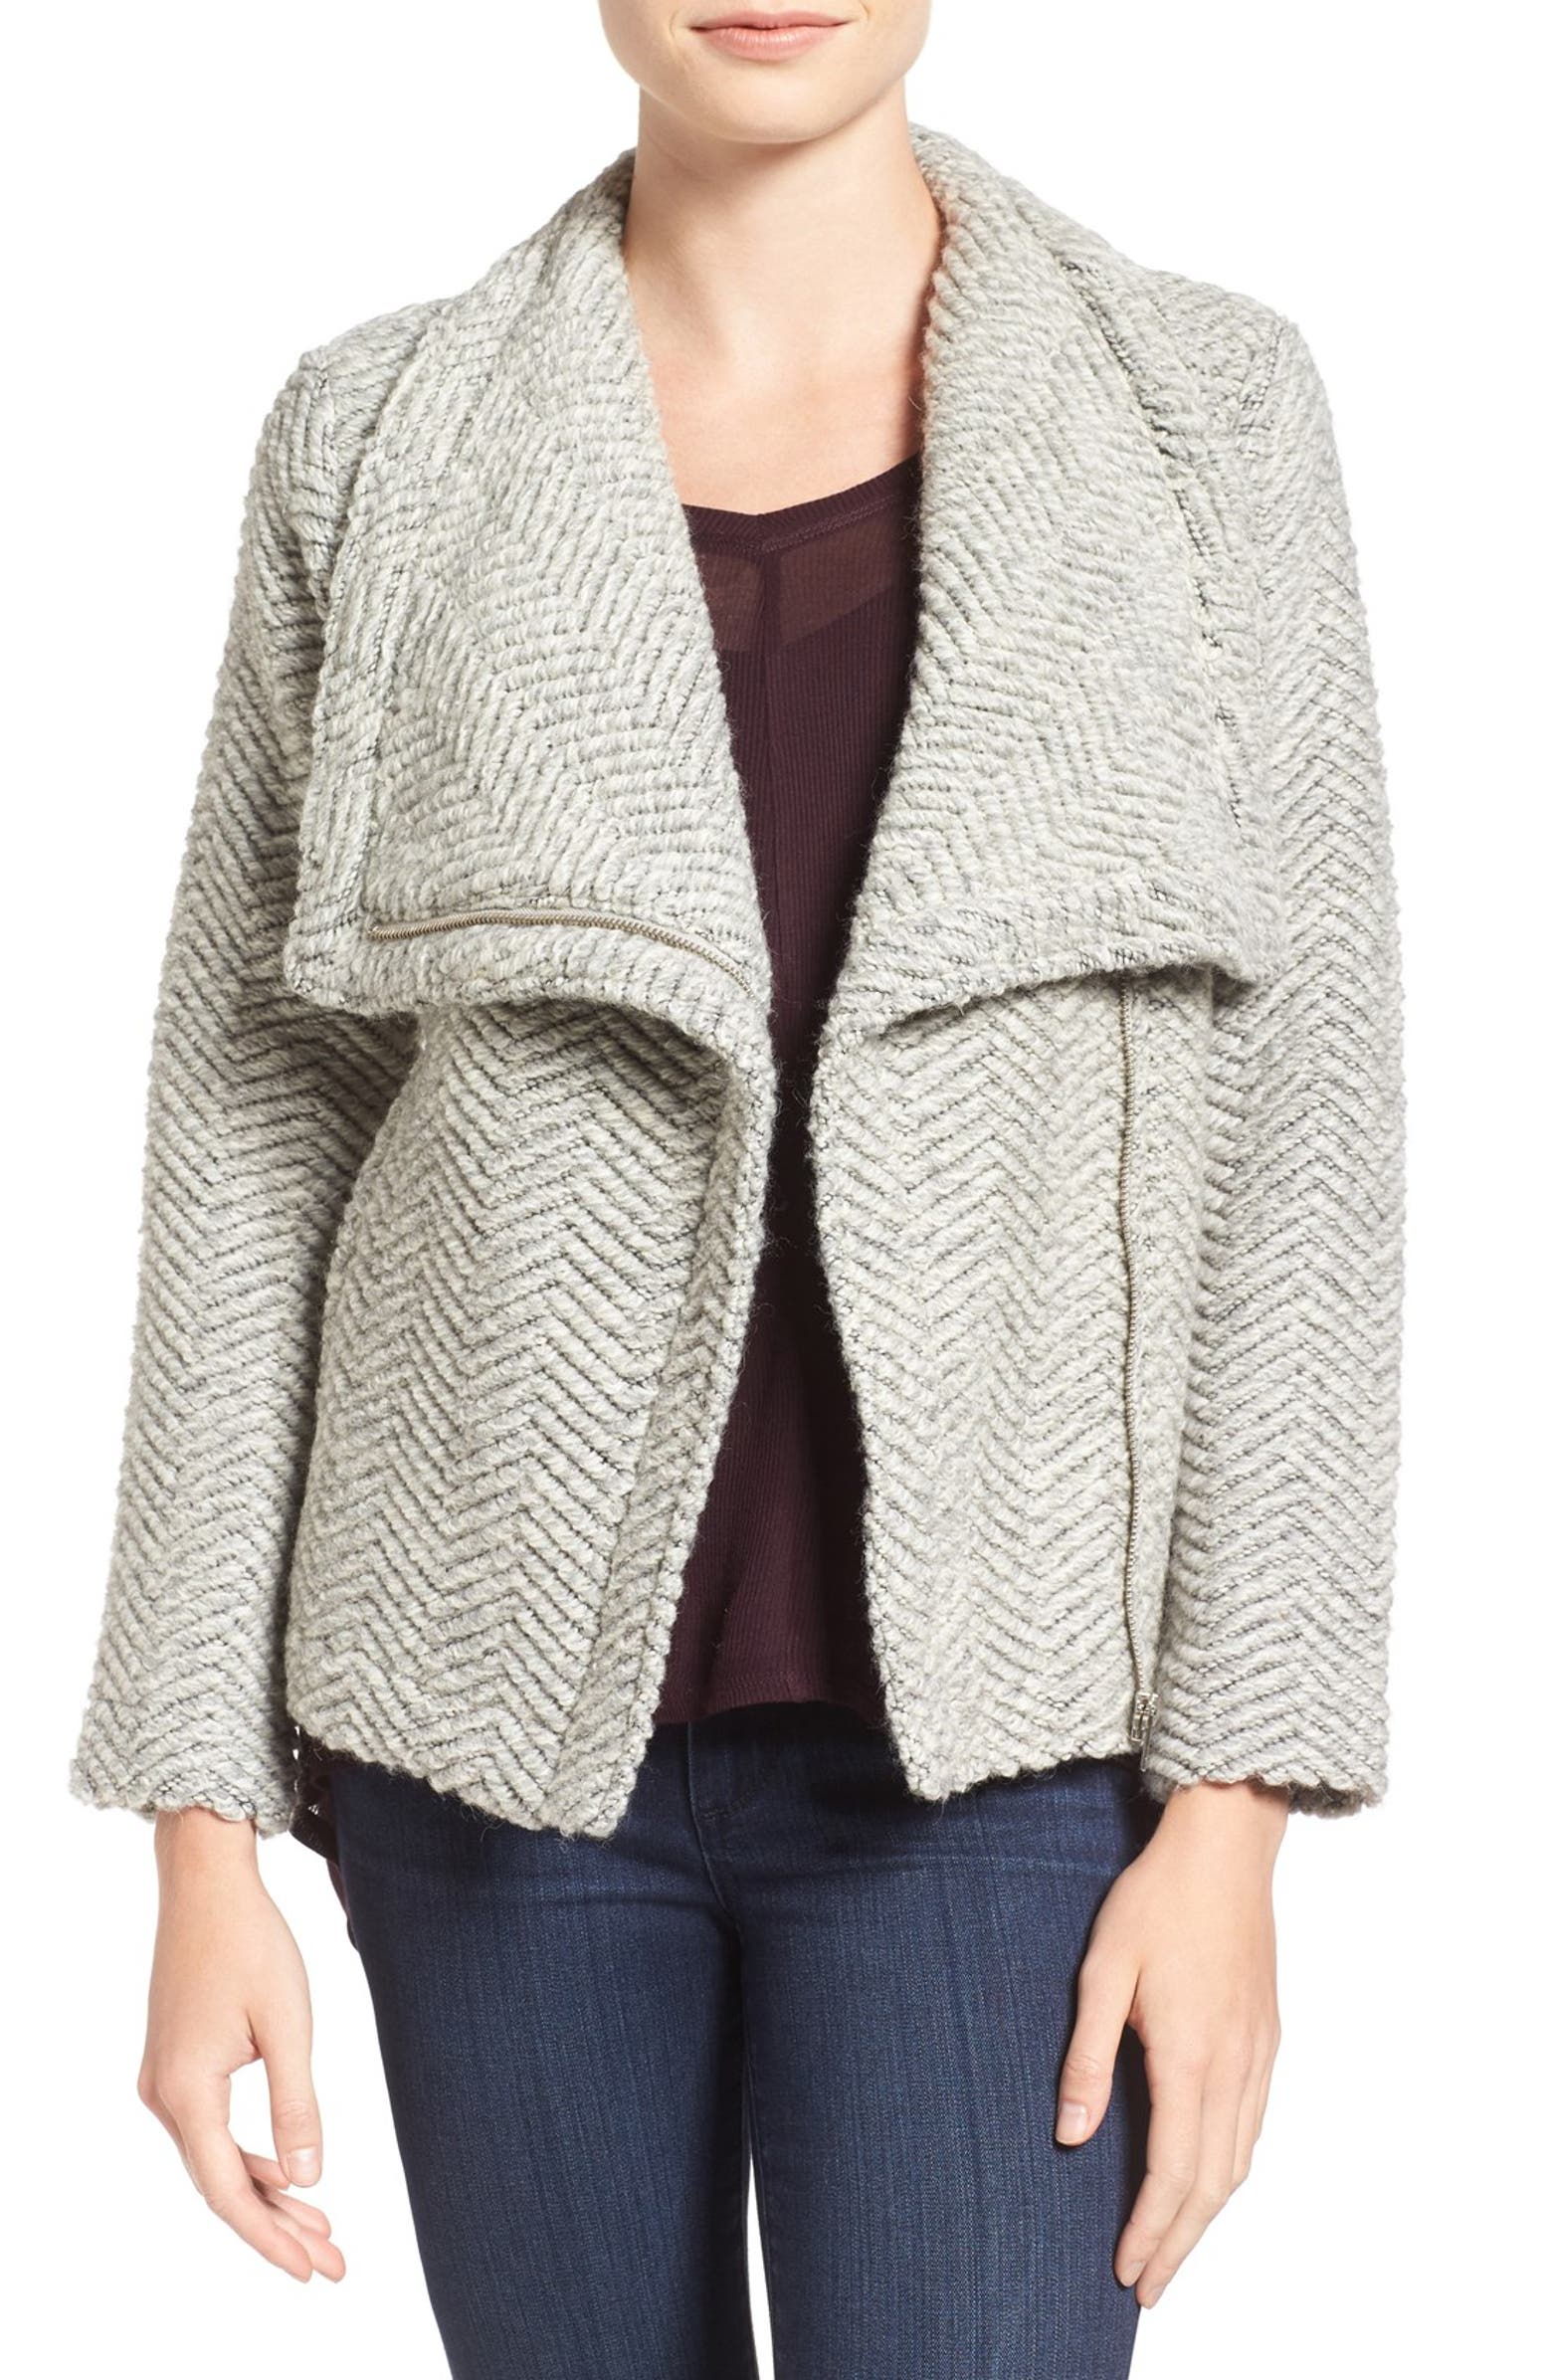 cupcakes and cashmere 'Sanford' Wool Blend Jacket | Nordstrom